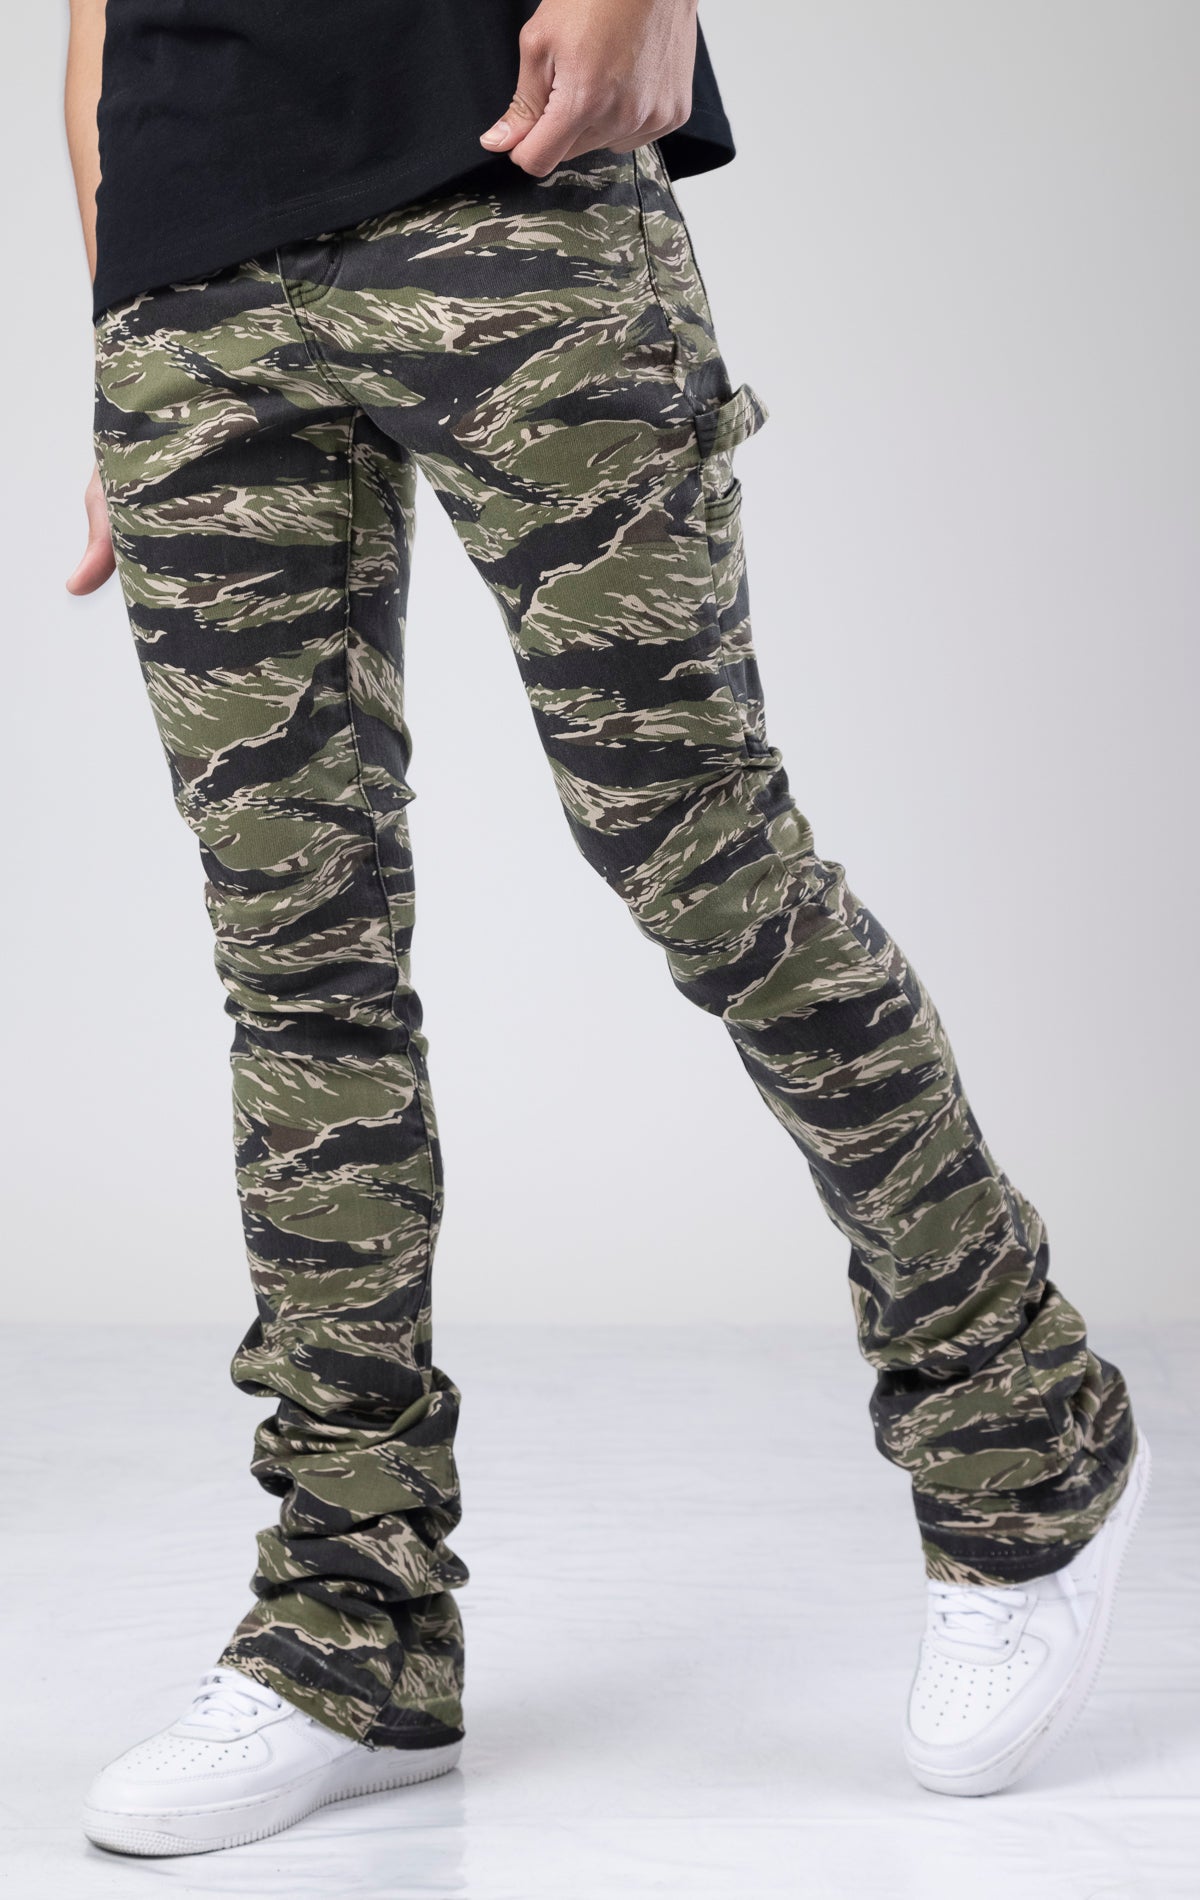 These jeans have a wide leg that dramatically flares out from the knee for a modern silhouette with a fashion-forward twist inspired by classic military aesthetics. They are made from a comfortable and durable, dark wash, cotton blend denim with stretch for all-day comfort. The jeans have functional front and back pockets, belt loops for adding a belt, and a signature patch on the back.